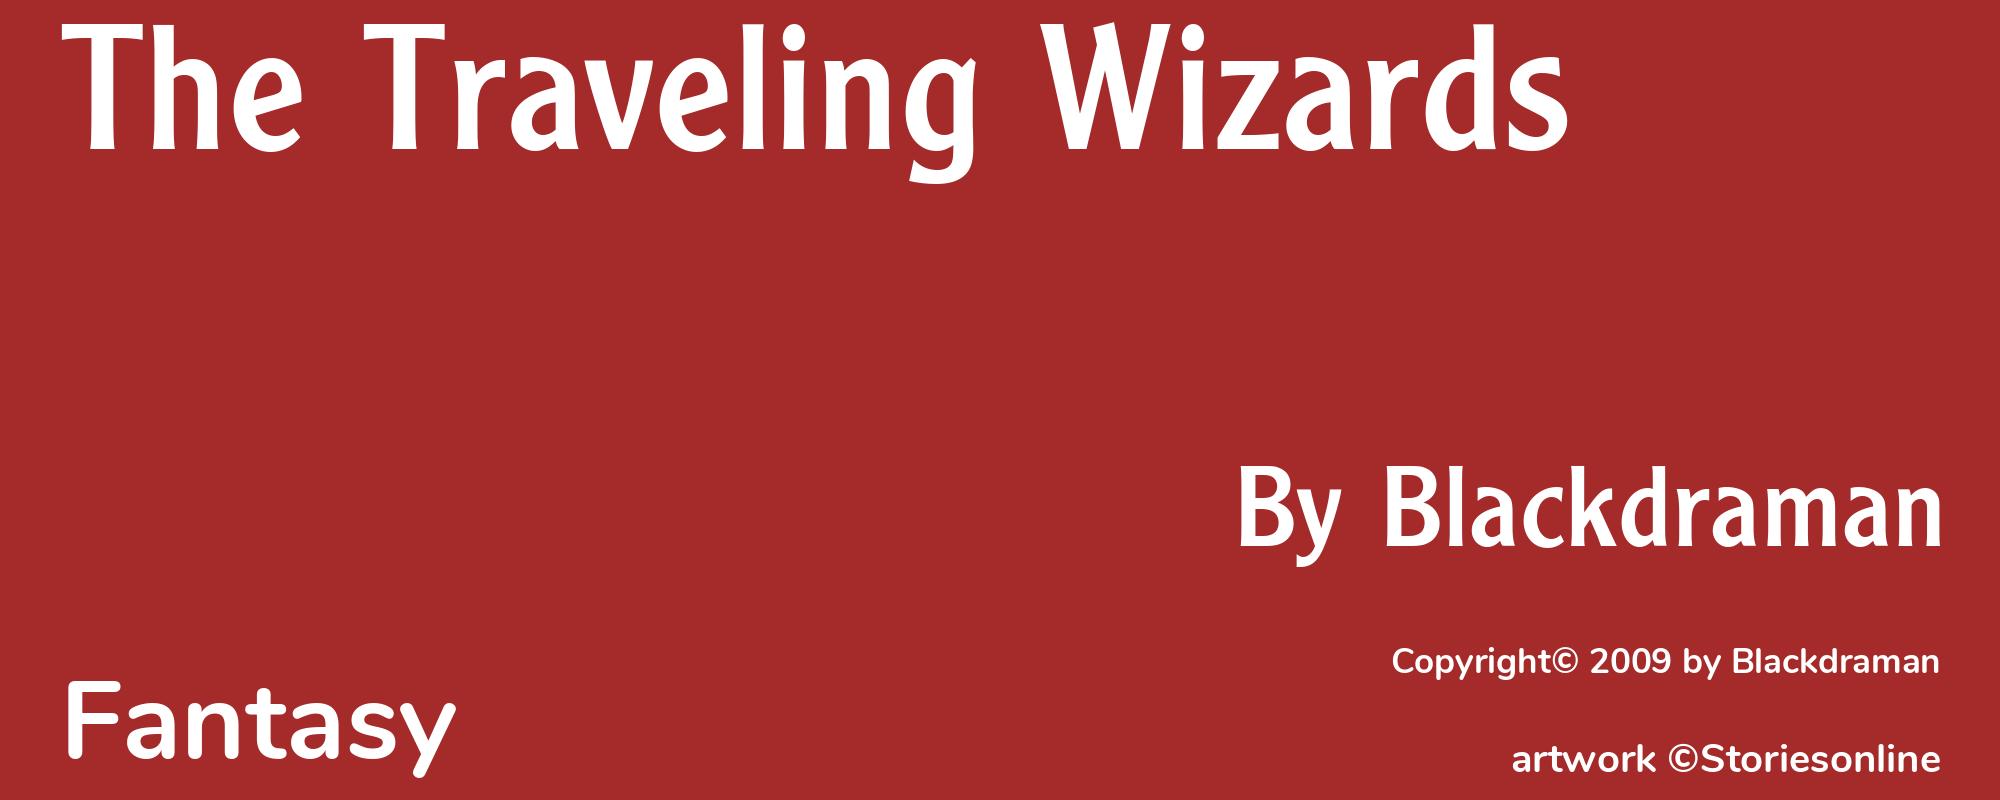 The Traveling Wizards - Cover